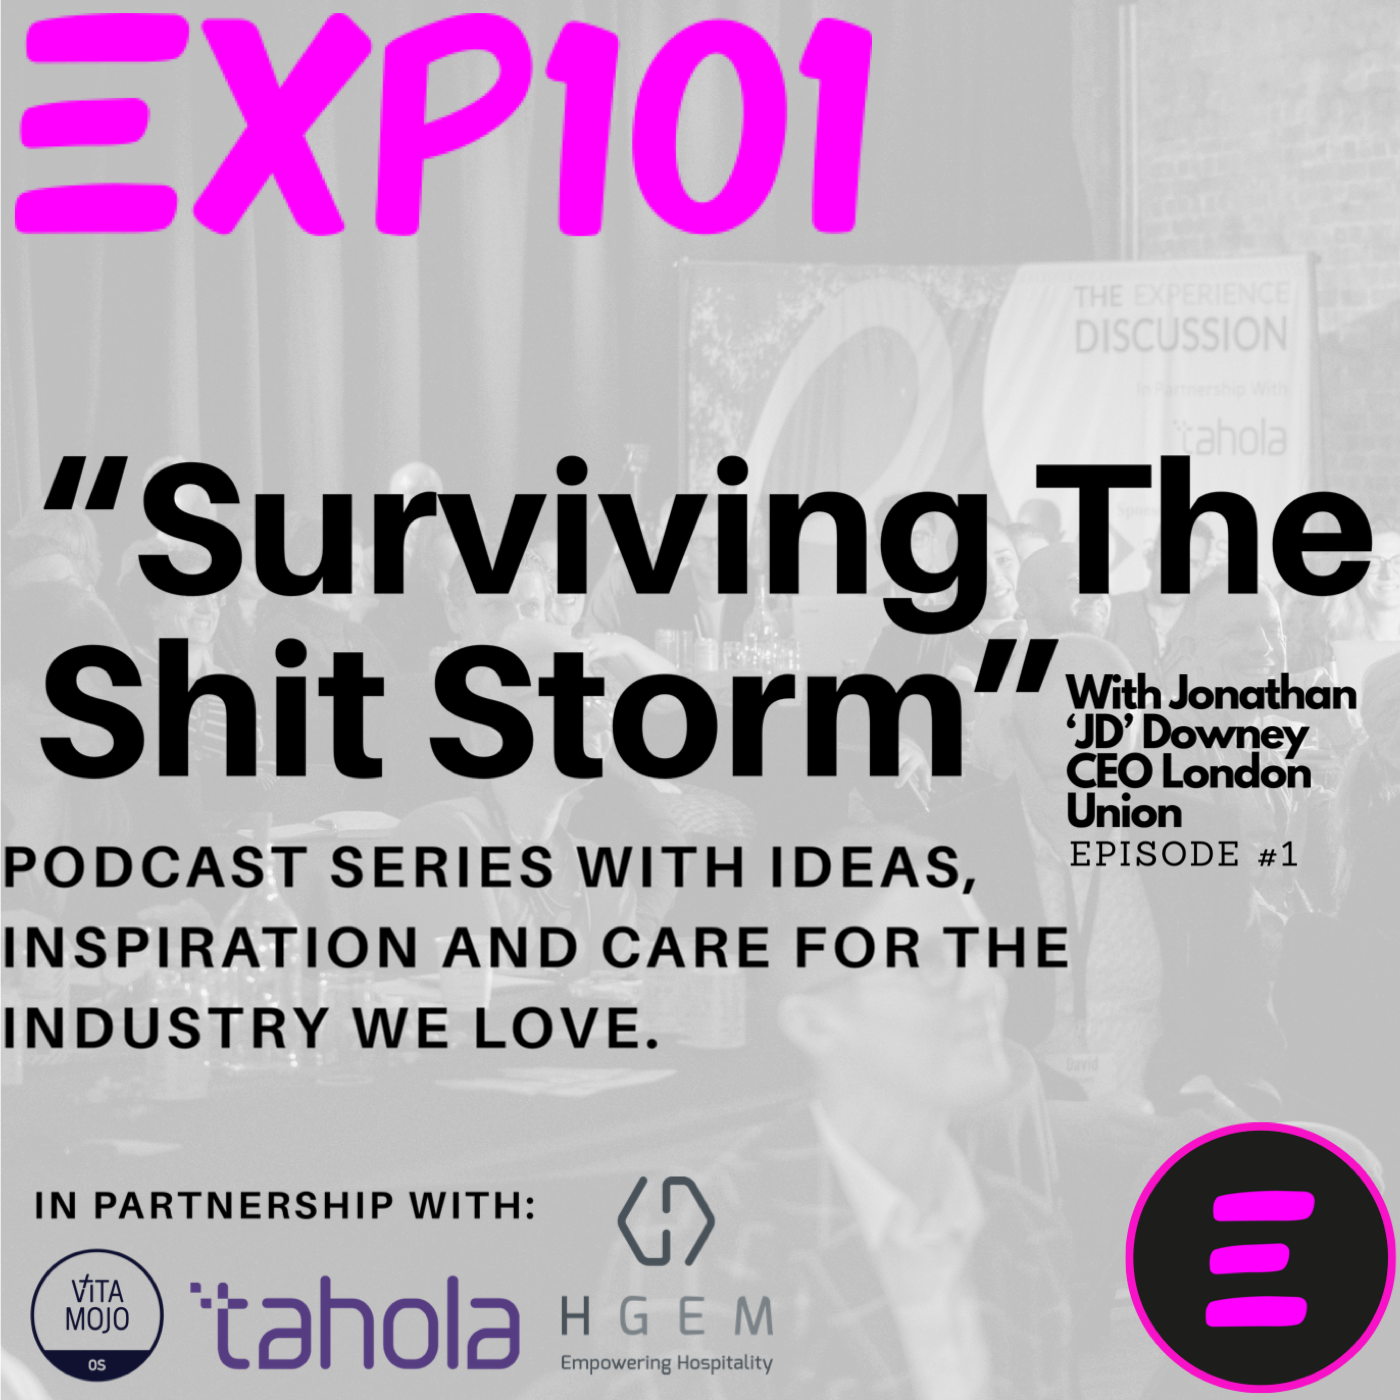 Surviving The Shit Storm Episode 1 with Jonathan Downey, Co-Founder and CEO of Street Feast Image